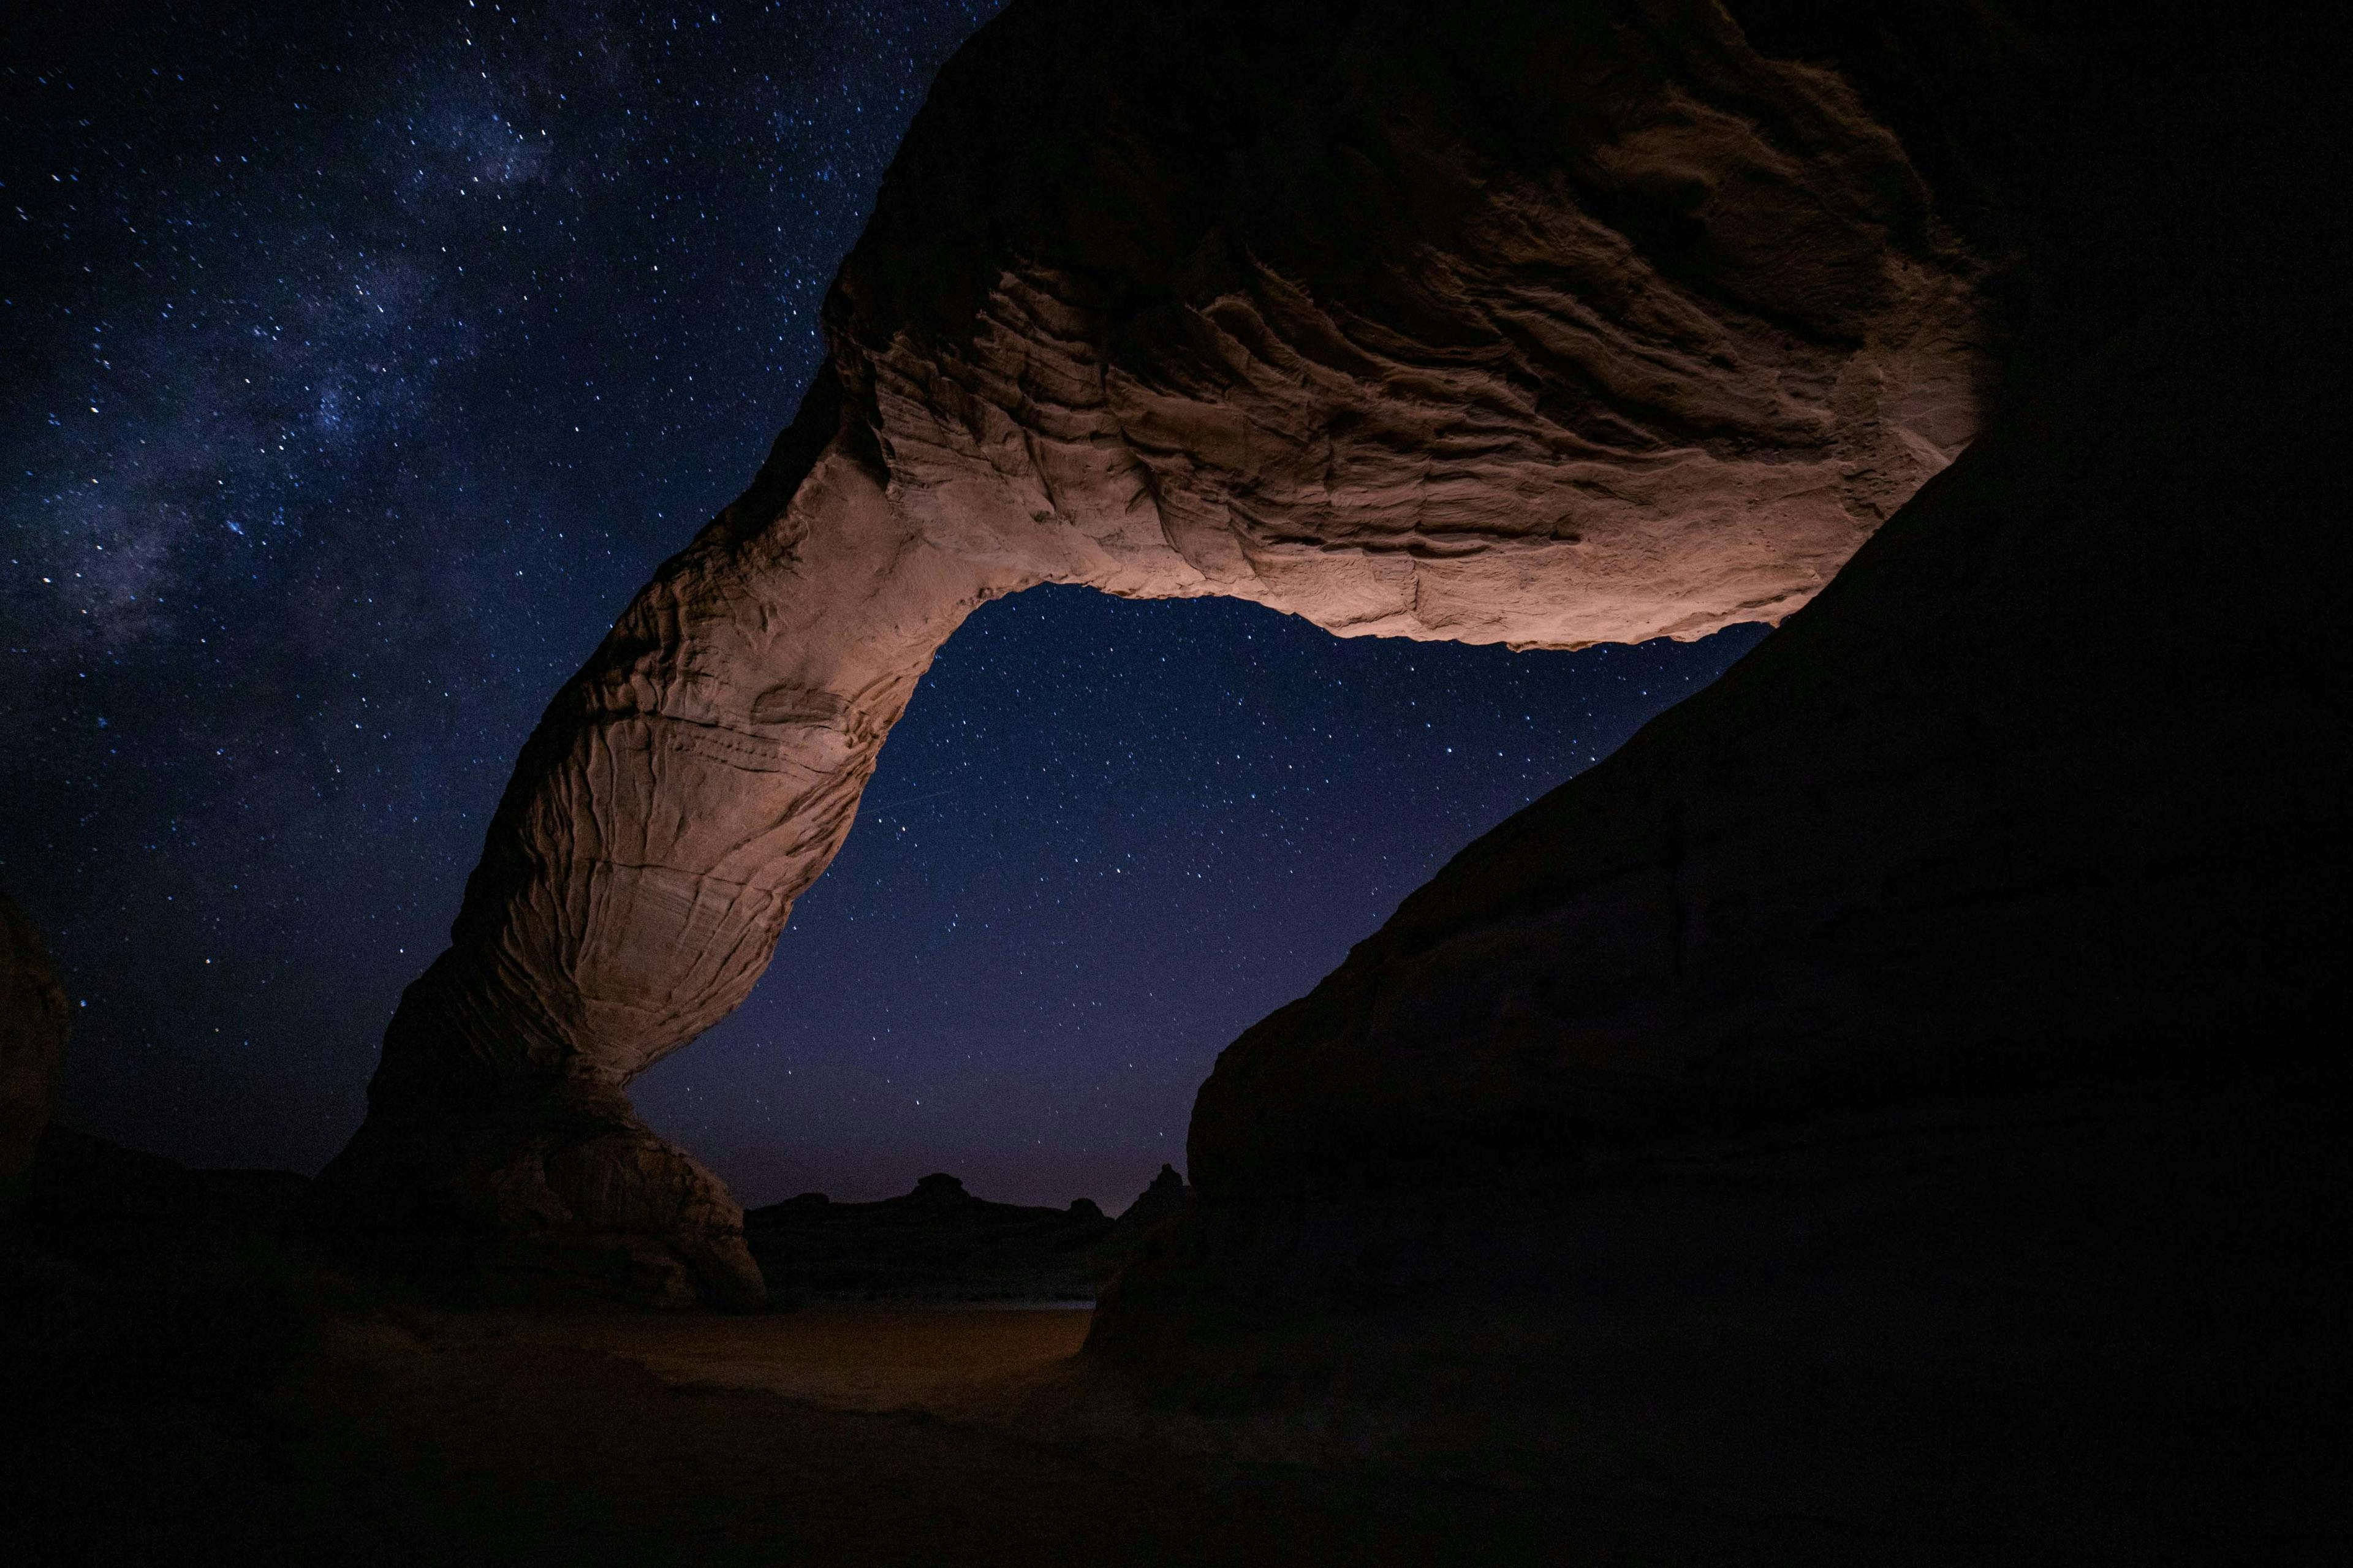 A starry night behind a rock formation.